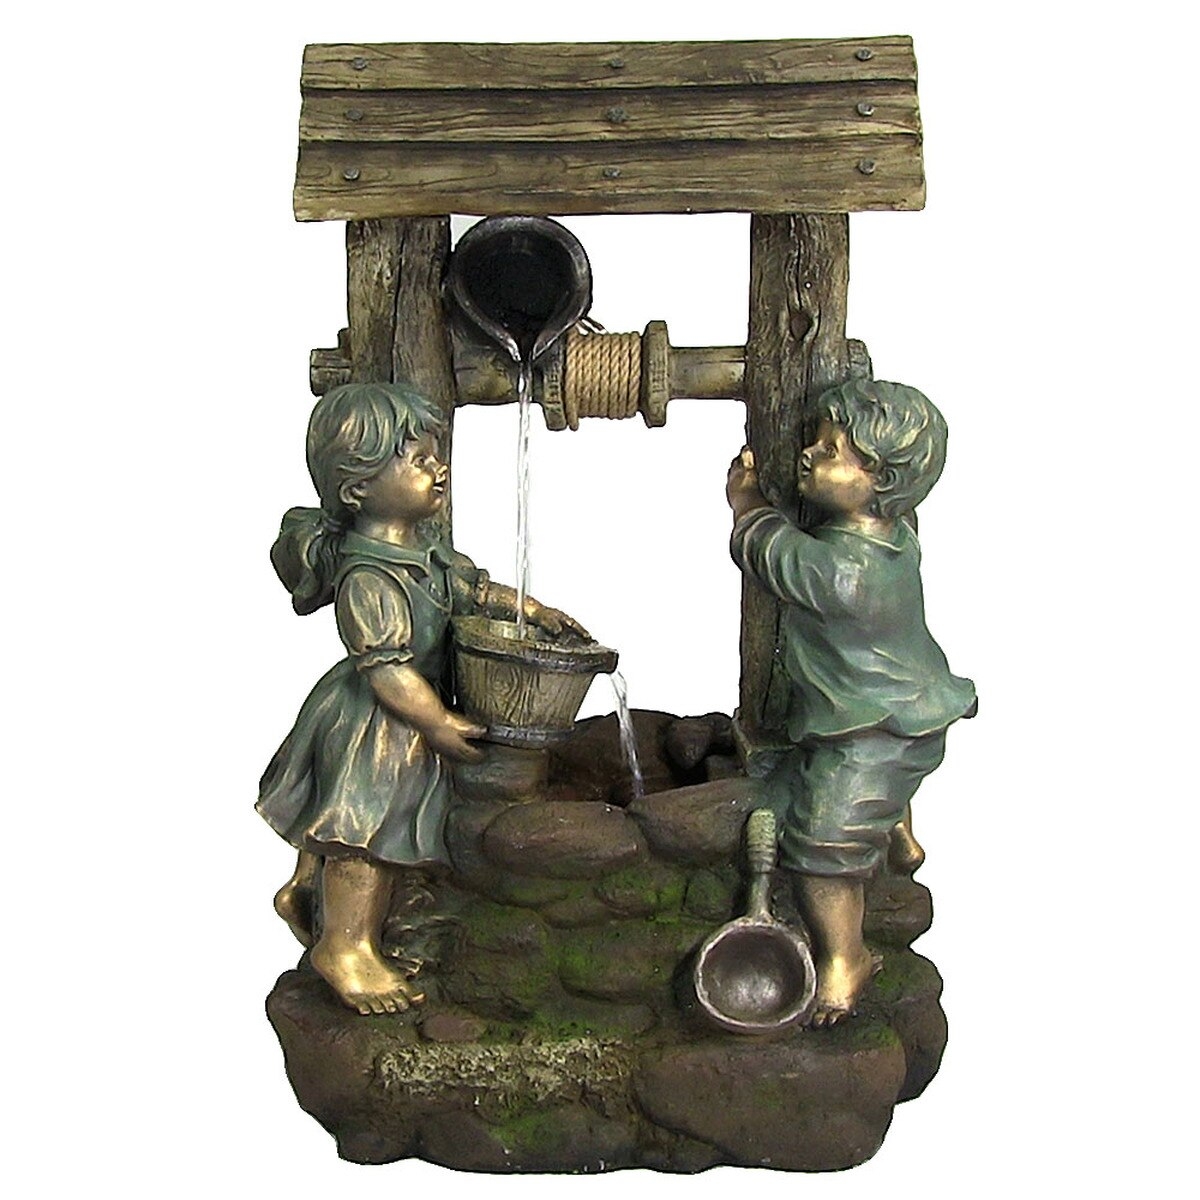 Sunnydaze Children at The Well Outdoor Water Fountain with LED Light, 39 Inch Tall